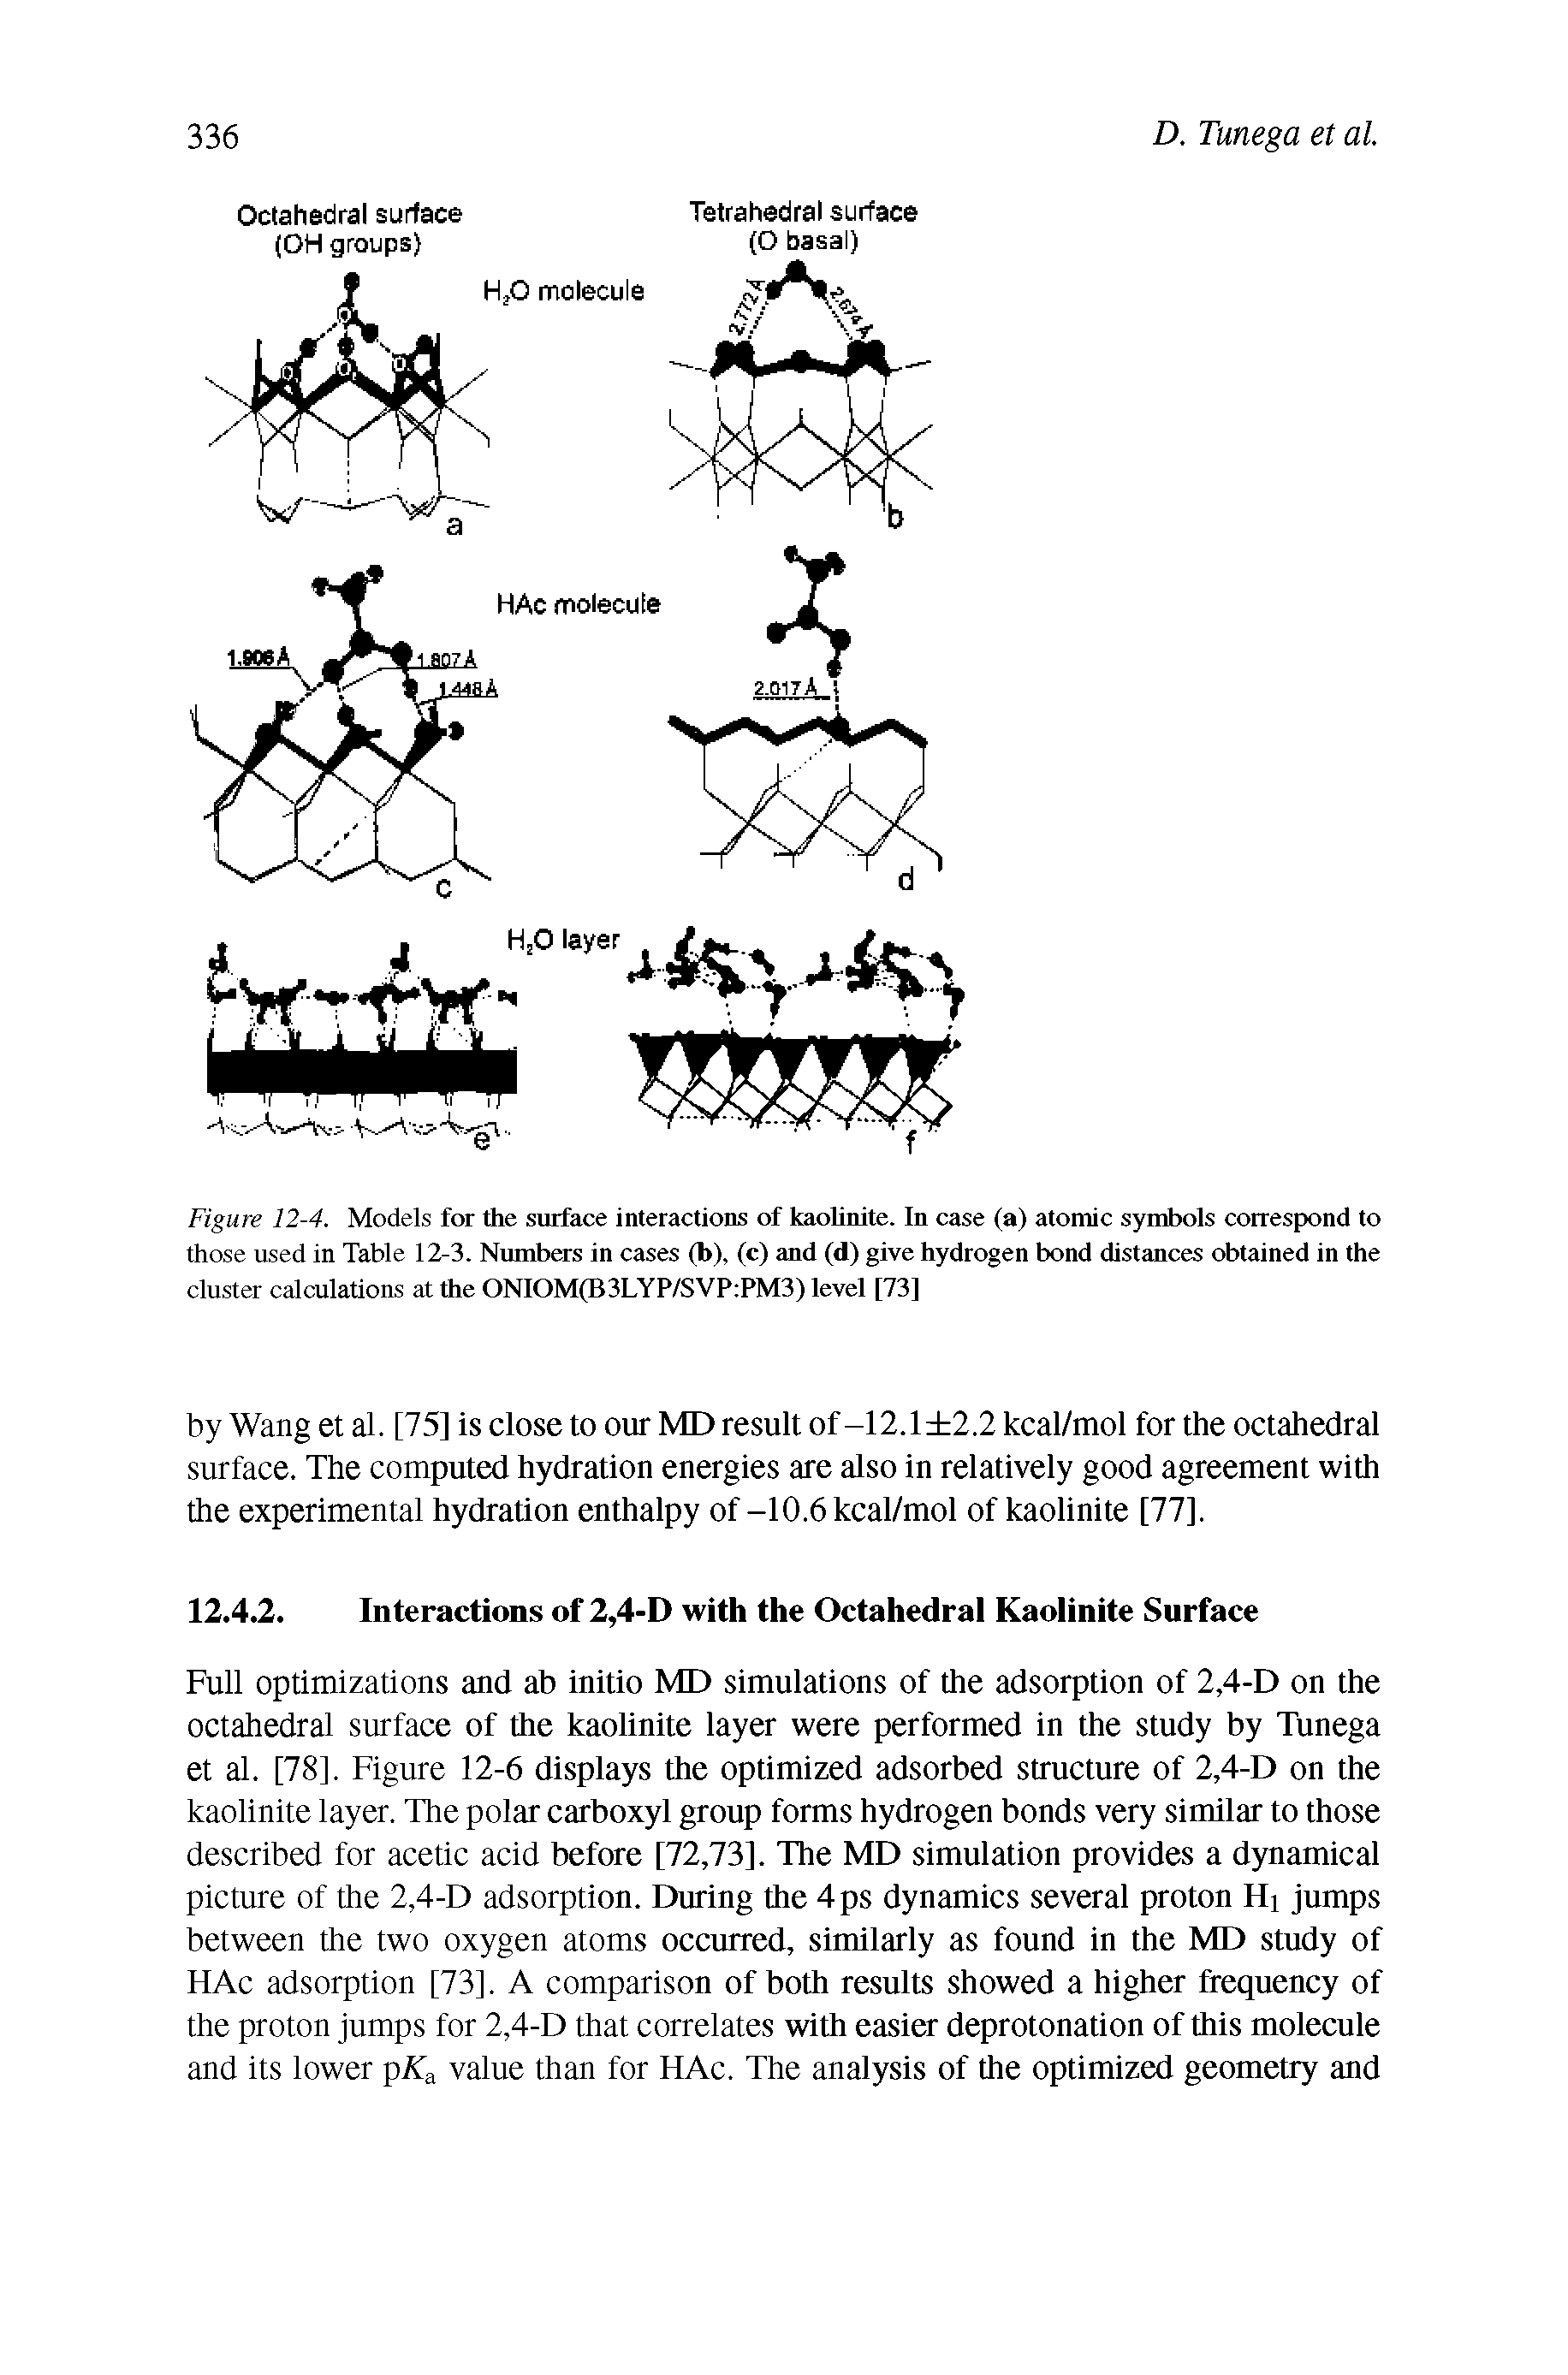 Figure 12-4. Models for the surface interactions of kaolinite. In case (a) atomic symbols correspond to those used in Table 12-3. Numbers in cases (b), (c) and (d) give hydrogen bond distances obtained in the cluster calculations at the ONIOM(B3LYP/SVP PM3) level [73]...